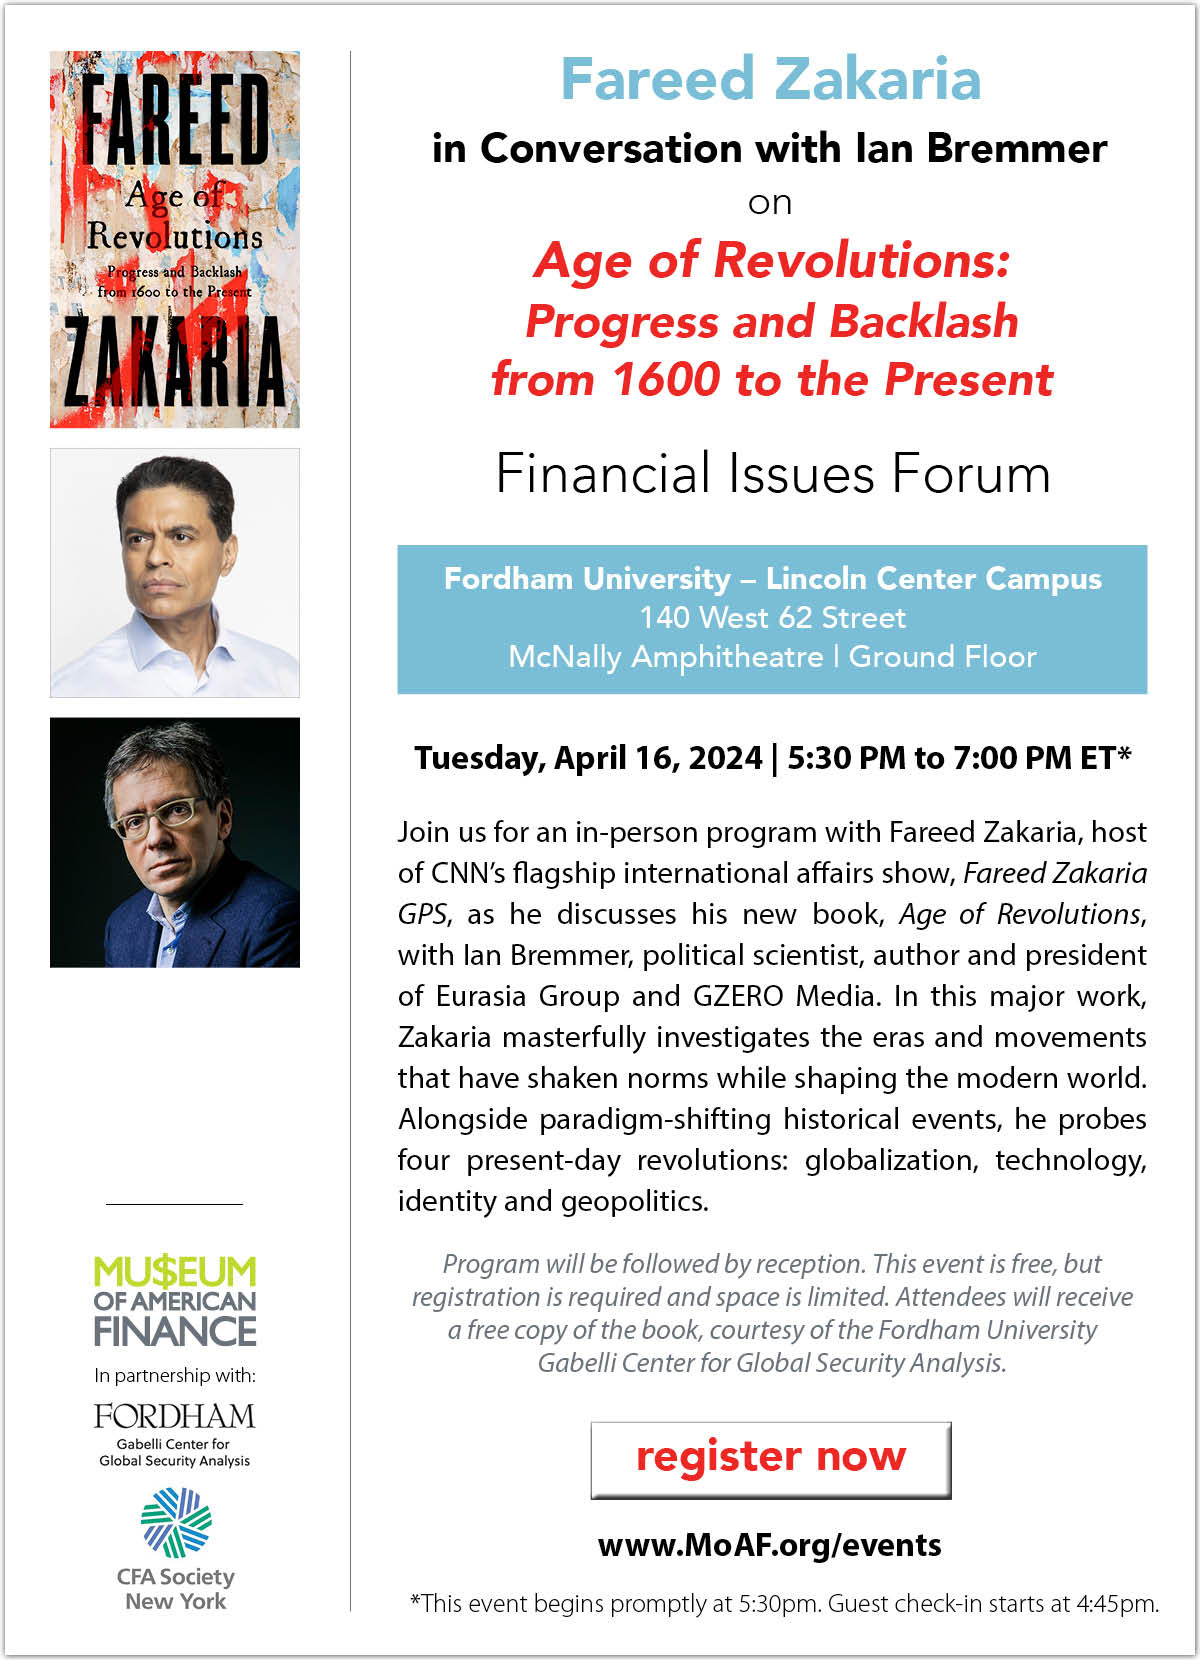 Fareed Zakaria and Ian Bremmer on Age of Revolutions